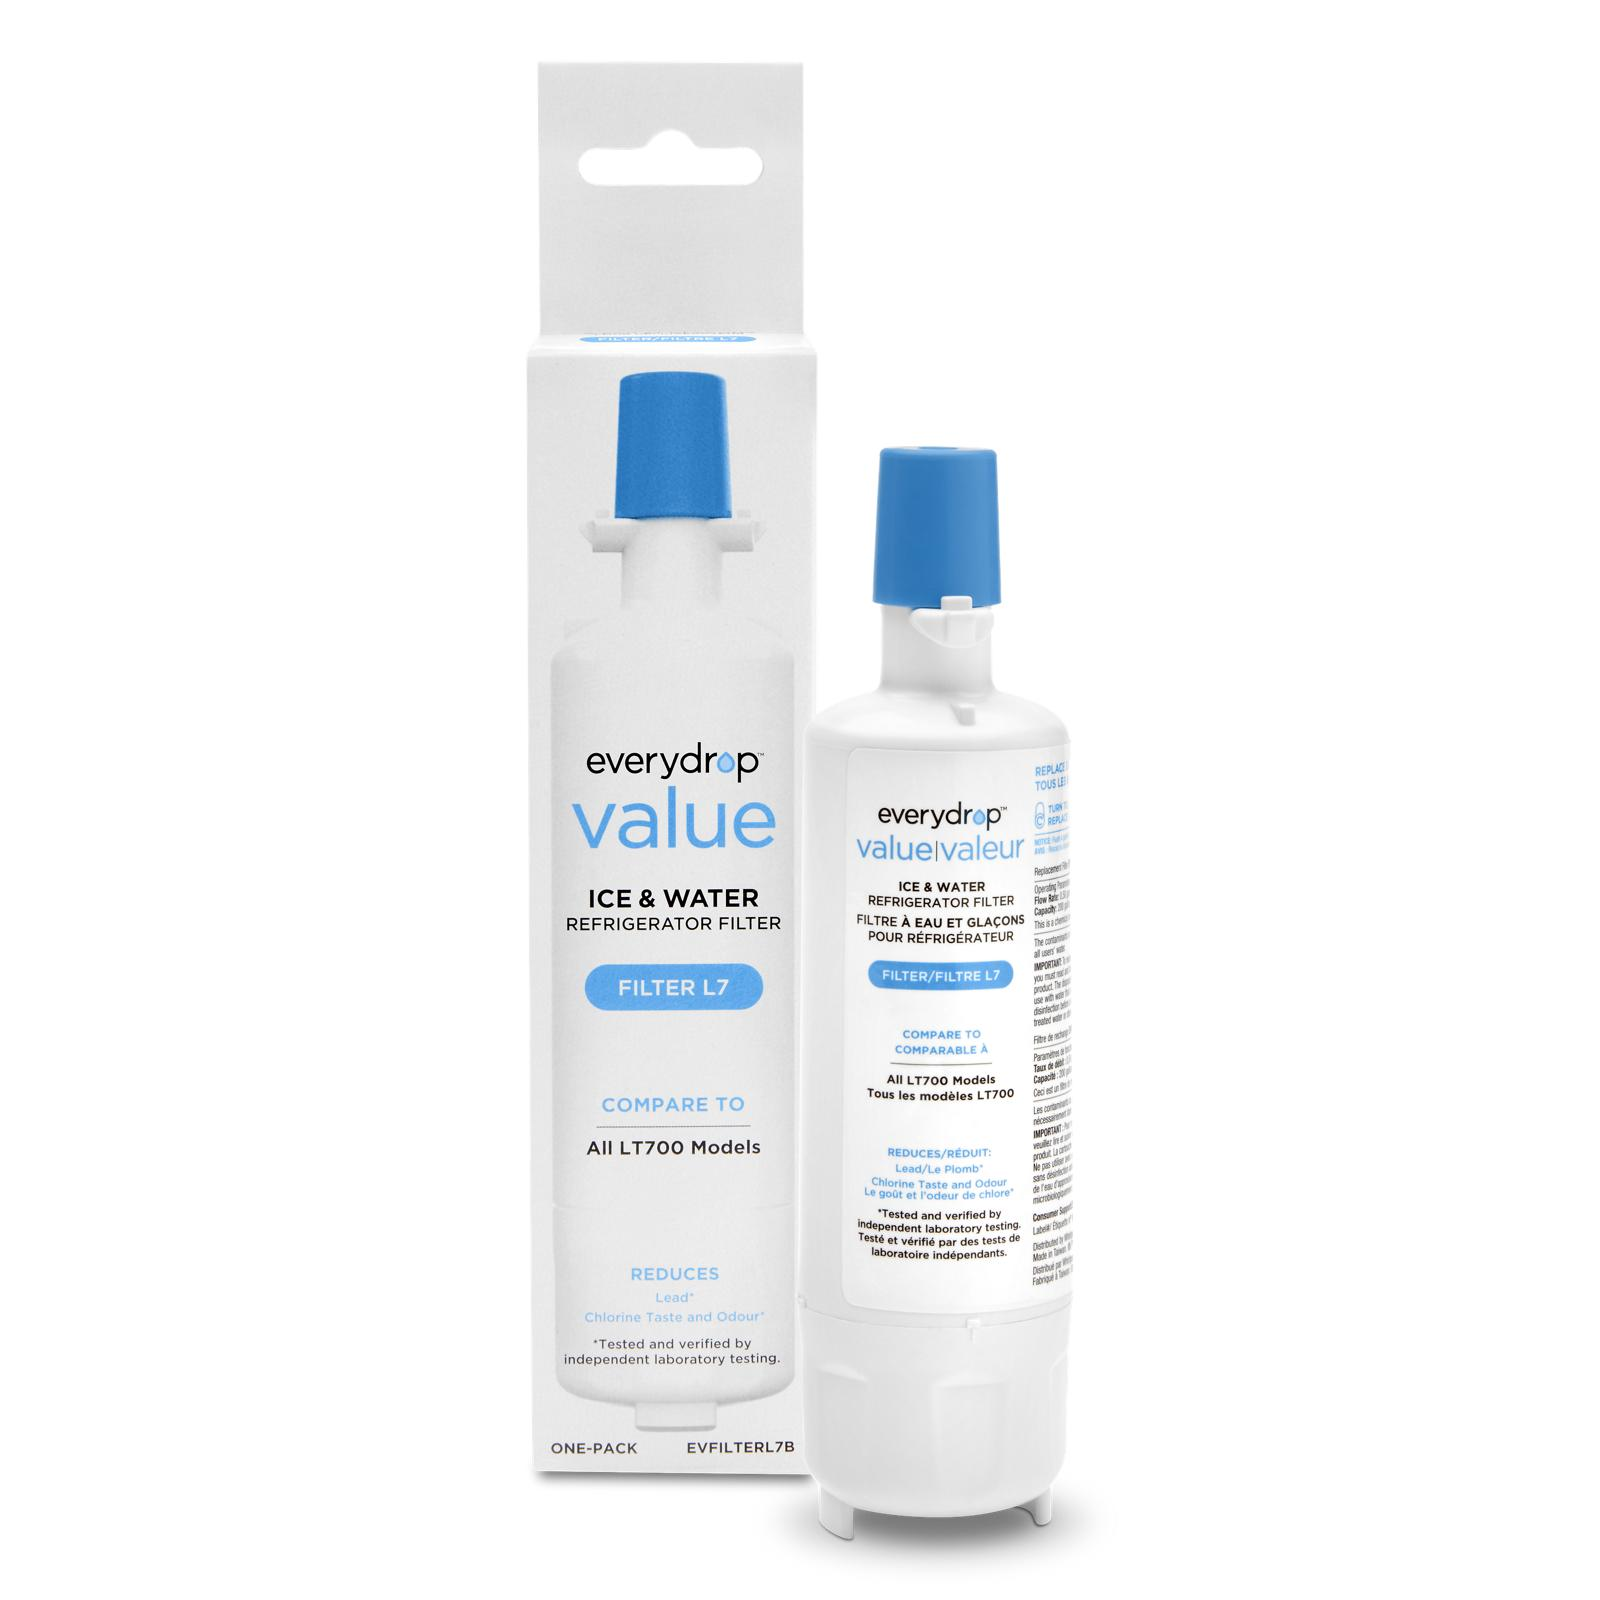 Whirlpool Refrigerator Water Filter L7 (compares to LG LT-700) - EVFILTERL7B